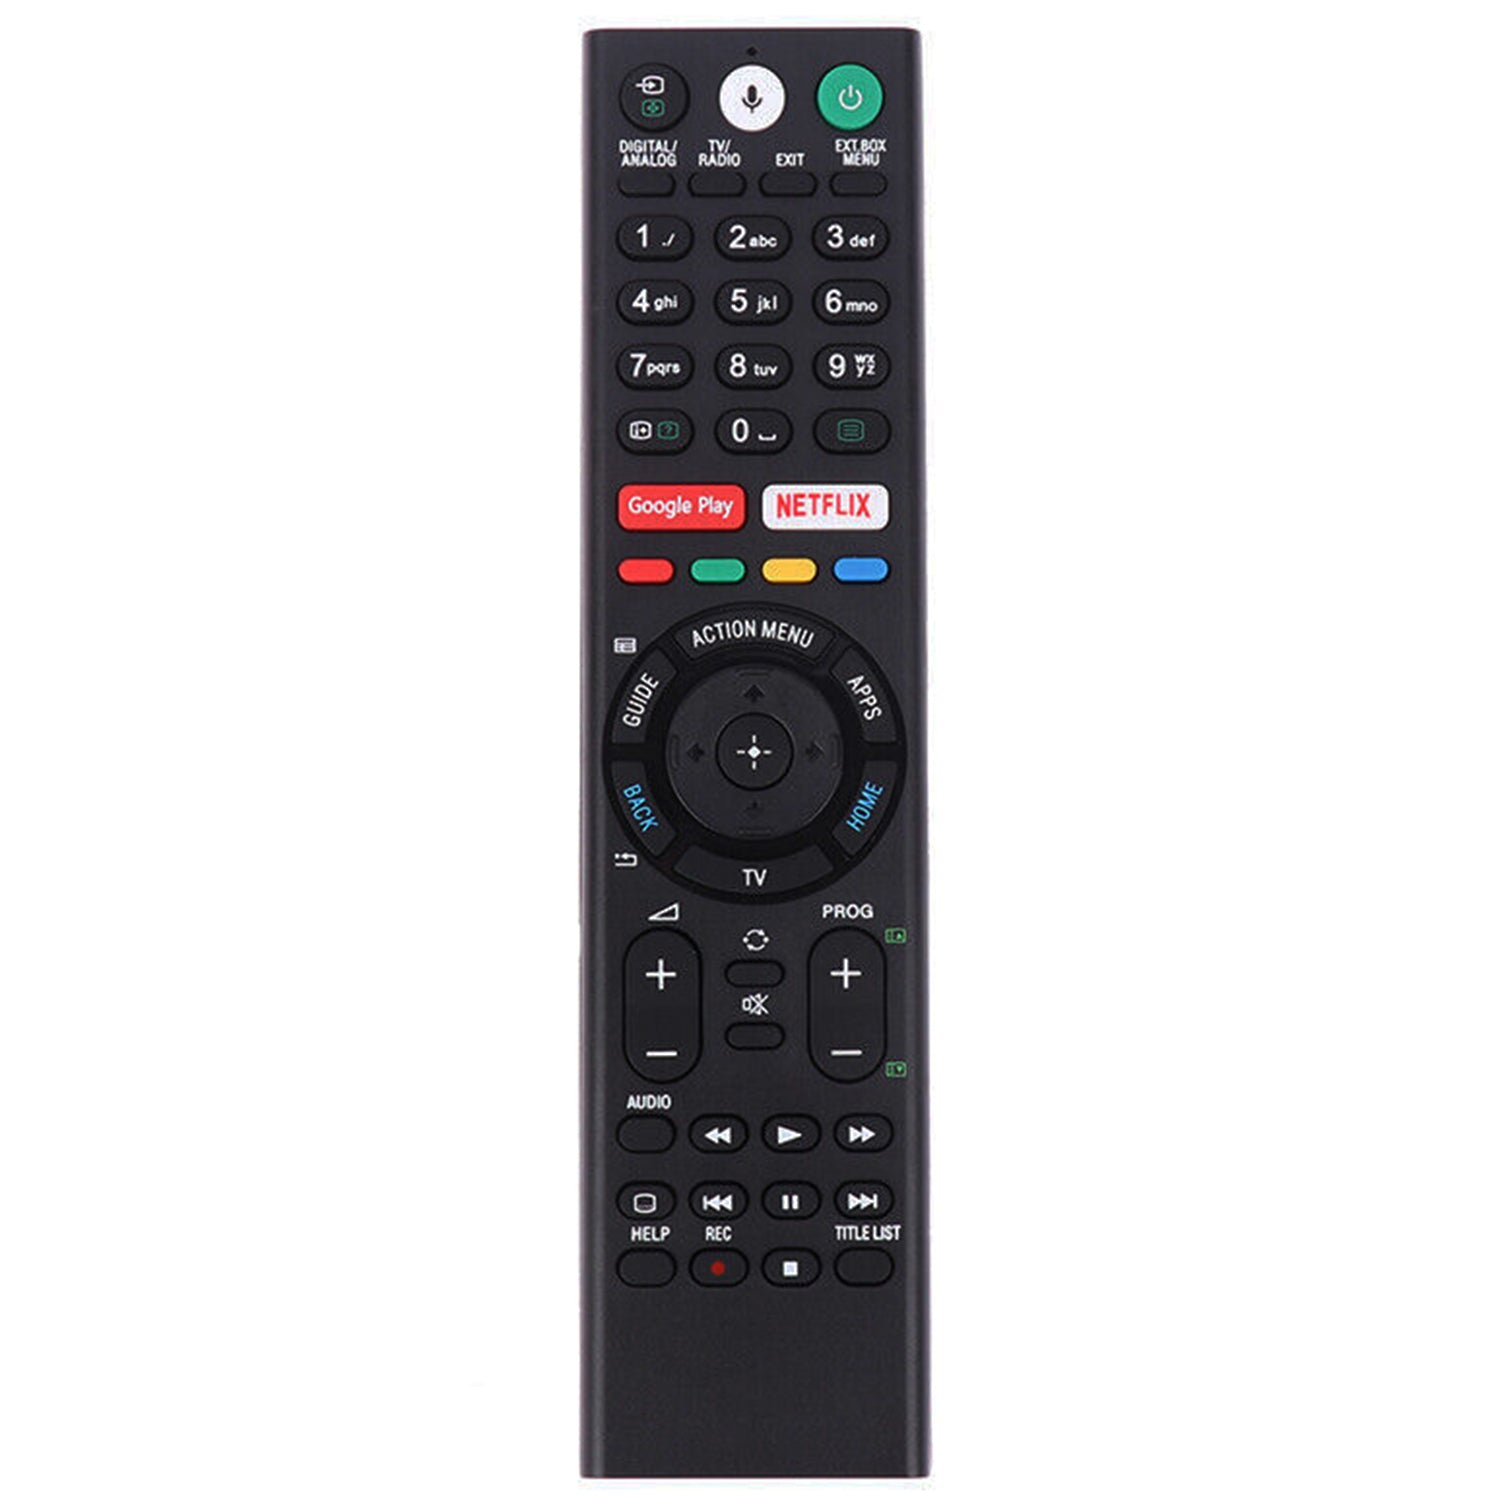 RMF-TX310E Voice Remote Control Replacement for Sony Bravia LED LCD TV